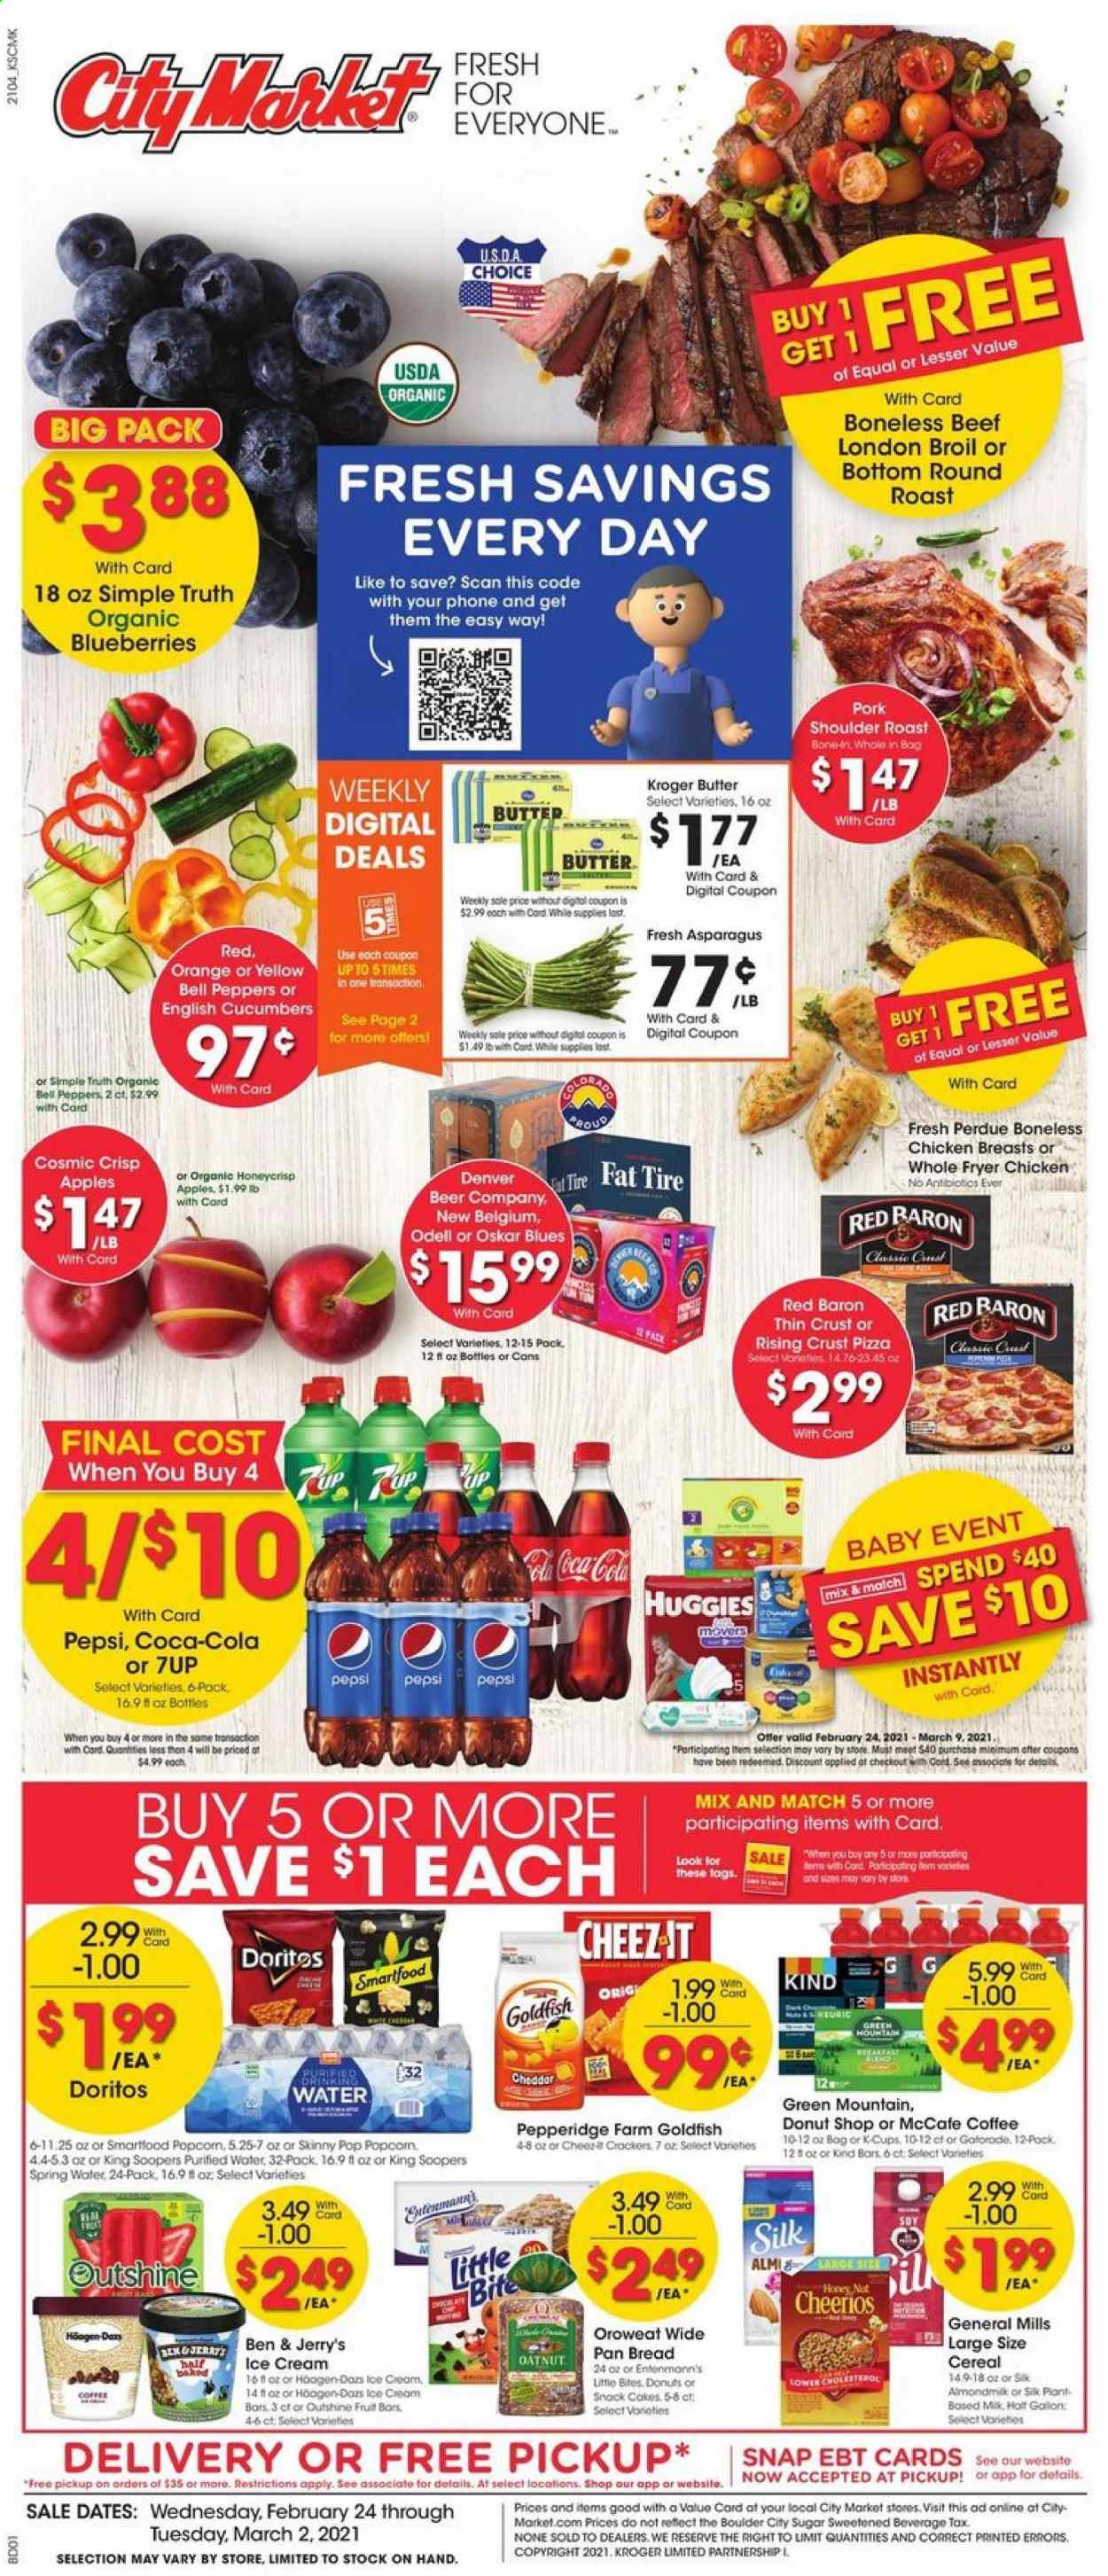 thumbnail - City Market Flyer - 02/24/2021 - 03/02/2021 - Sales products - blueberries, bread, cake, Little Bites, apples, oranges, pizza, Perdue®, cheddar, almond milk, Silk, butter, ice cream, Ben & Jerry's, bell peppers, Red Baron, Doritos, snack, Smartfood, Goldfish, Skinny Pop, sugar, cucumber, cereals, Cheerios, Coca-Cola, Pepsi, 7UP, Gatorade, spring water, purified water, coffee, coffee capsules, L'Or, McCafe, K-Cups, Green Mountain, wine, beer, chicken breasts, beef meat, round roast, pork meat, pork roast, pork shoulder, Huggies, pan, deep fryer. Page 1.